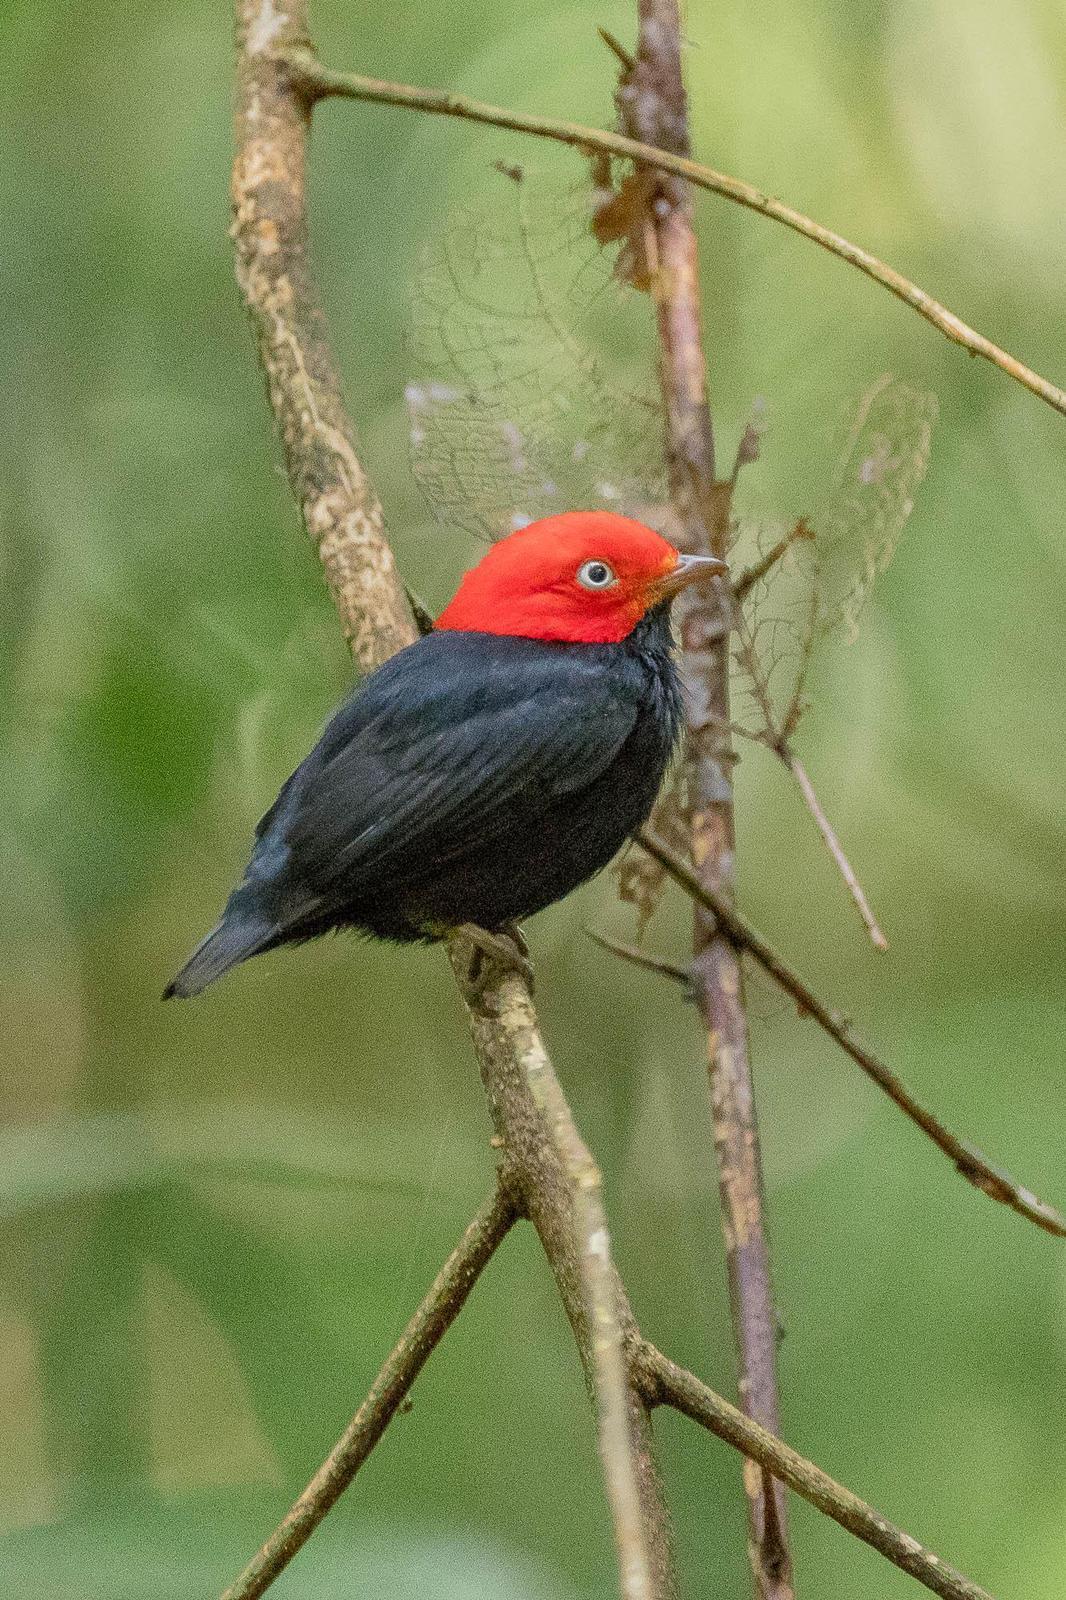 Red-capped Manakin Photo by Denis Rivard